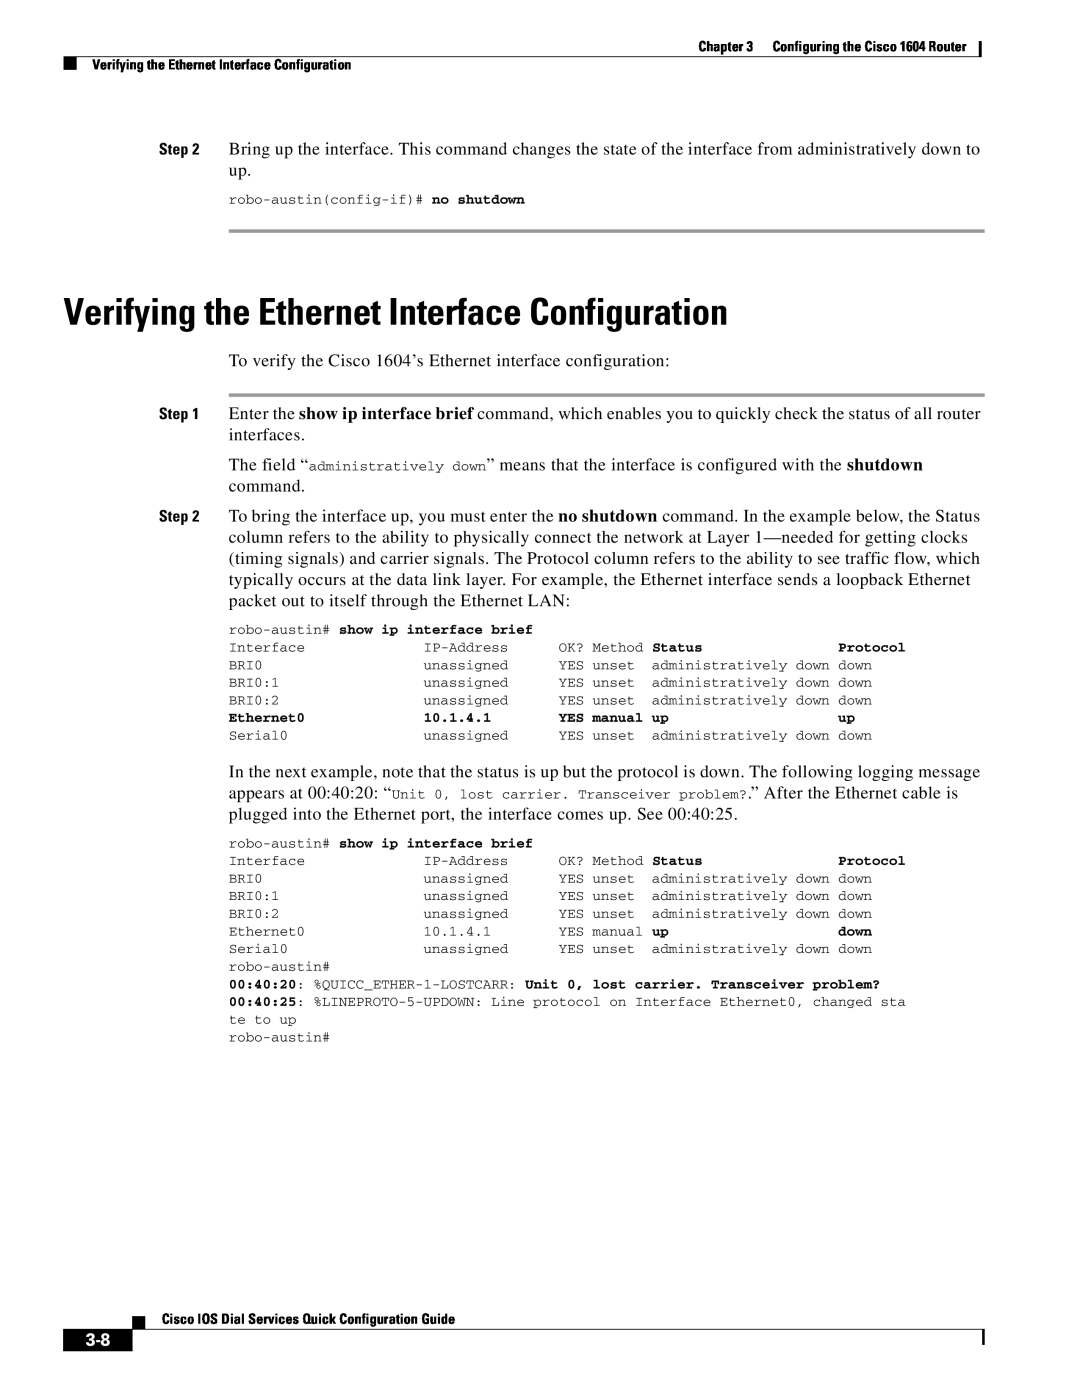 Cisco Systems 1604 manual Verifying the Ethernet Interface Configuration 